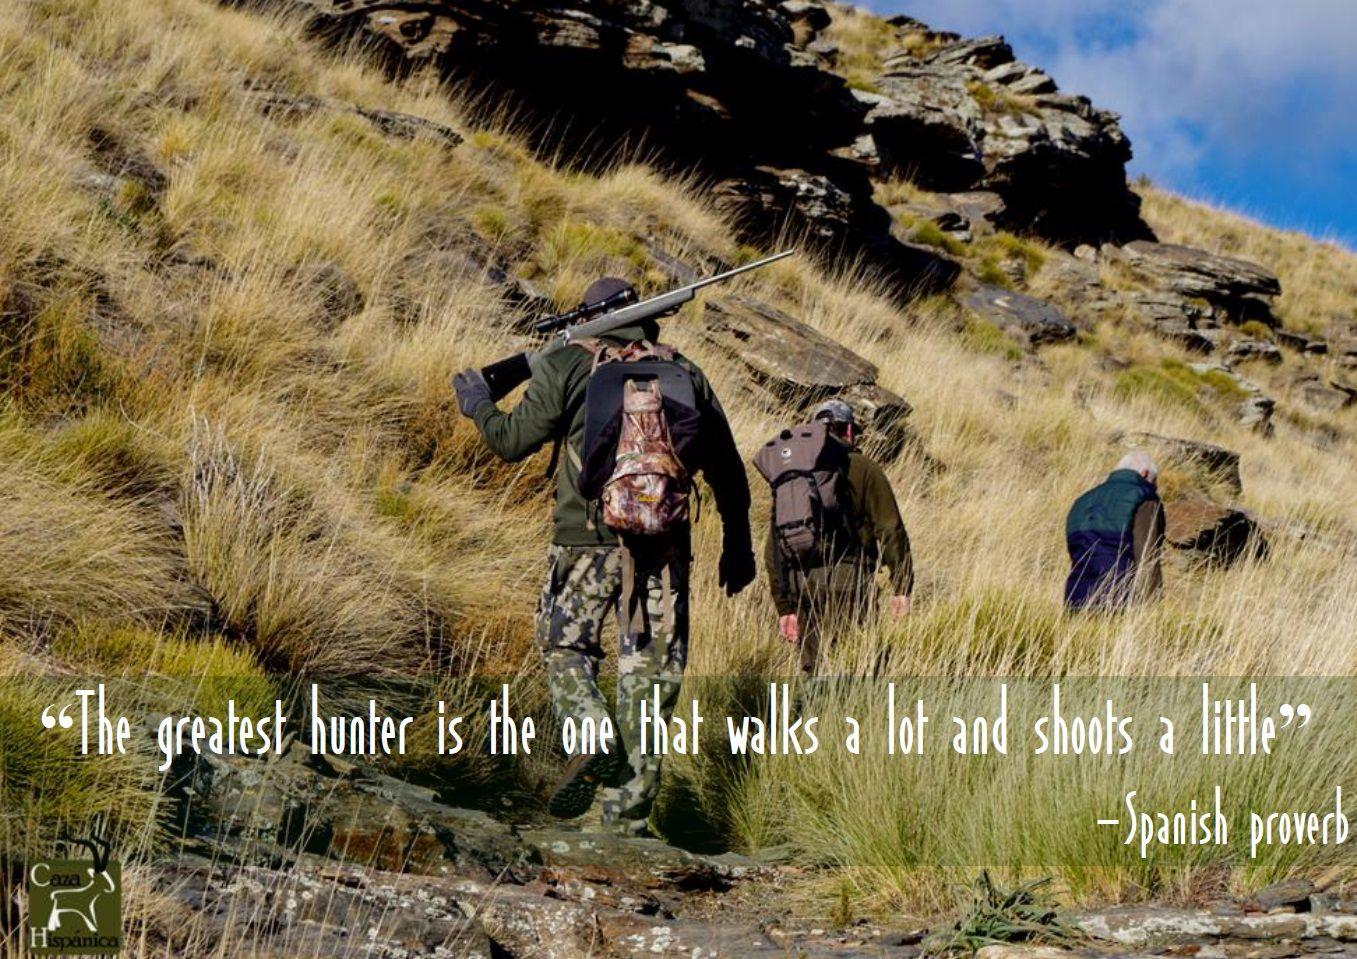 Hunting wallpaper and quotes made in Spain Hispánica